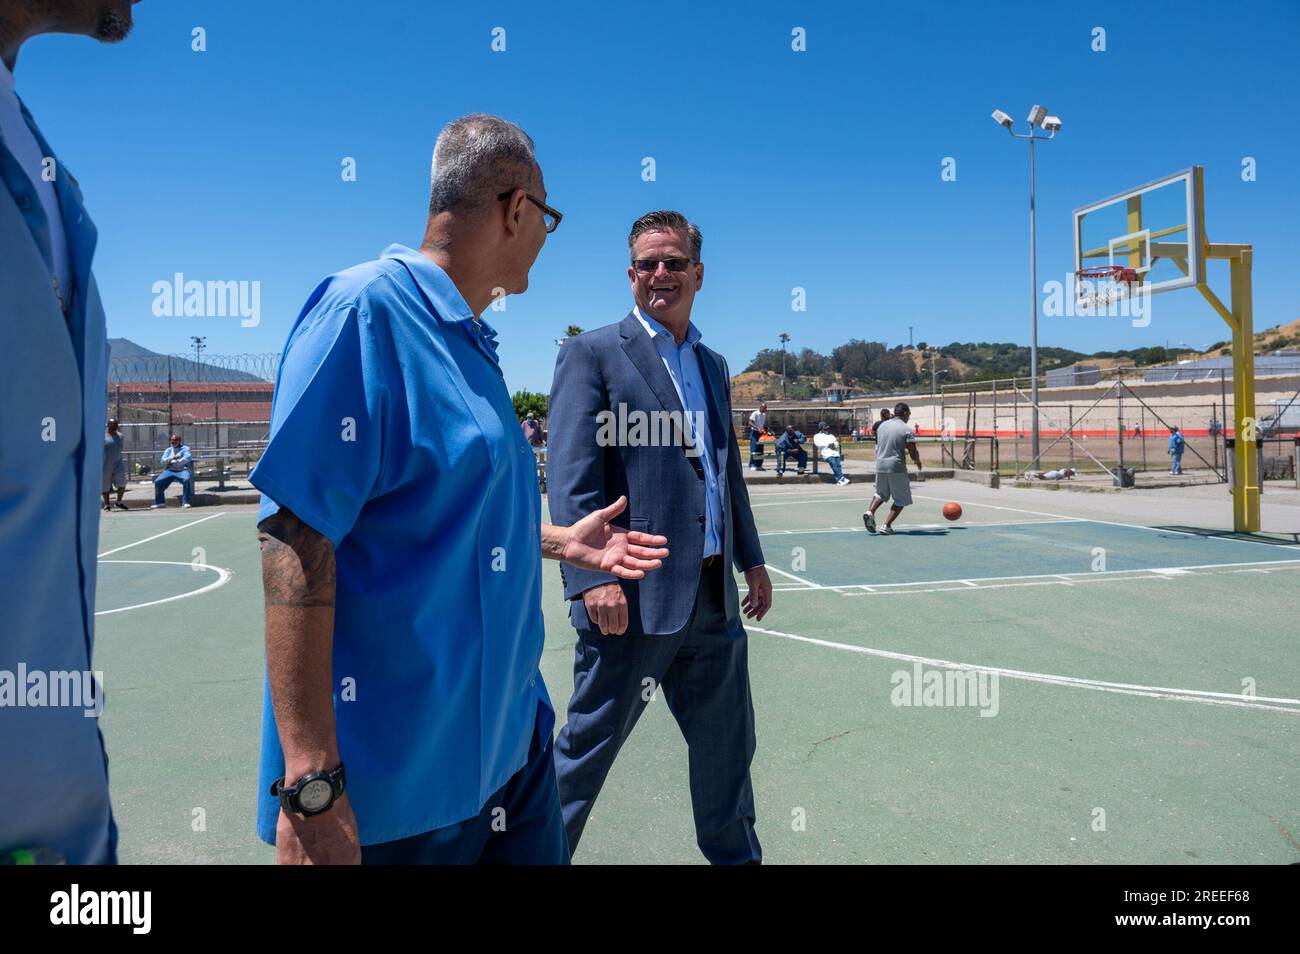 San Rafael, CA, USA. 26th July, 2023. Warden Ron Broomfield walks the yard and talks with inmates at San Quentin State Prison Wednesday, July 26, 2023 in San Rafael. CDCR is offering a tour of San Quentin State Prison to highlight how the facility's rehabilitation and education programs improve public safety. In March of 2023, Governor Newsom announced California intends to transform the prison into the San Quentin Rehabilitation Center. The transformation is being guided by a team of correctional, reentry, and rehabilitation experts. Visitors can expect a tour of the chapel, the Last Mile Stock Photo